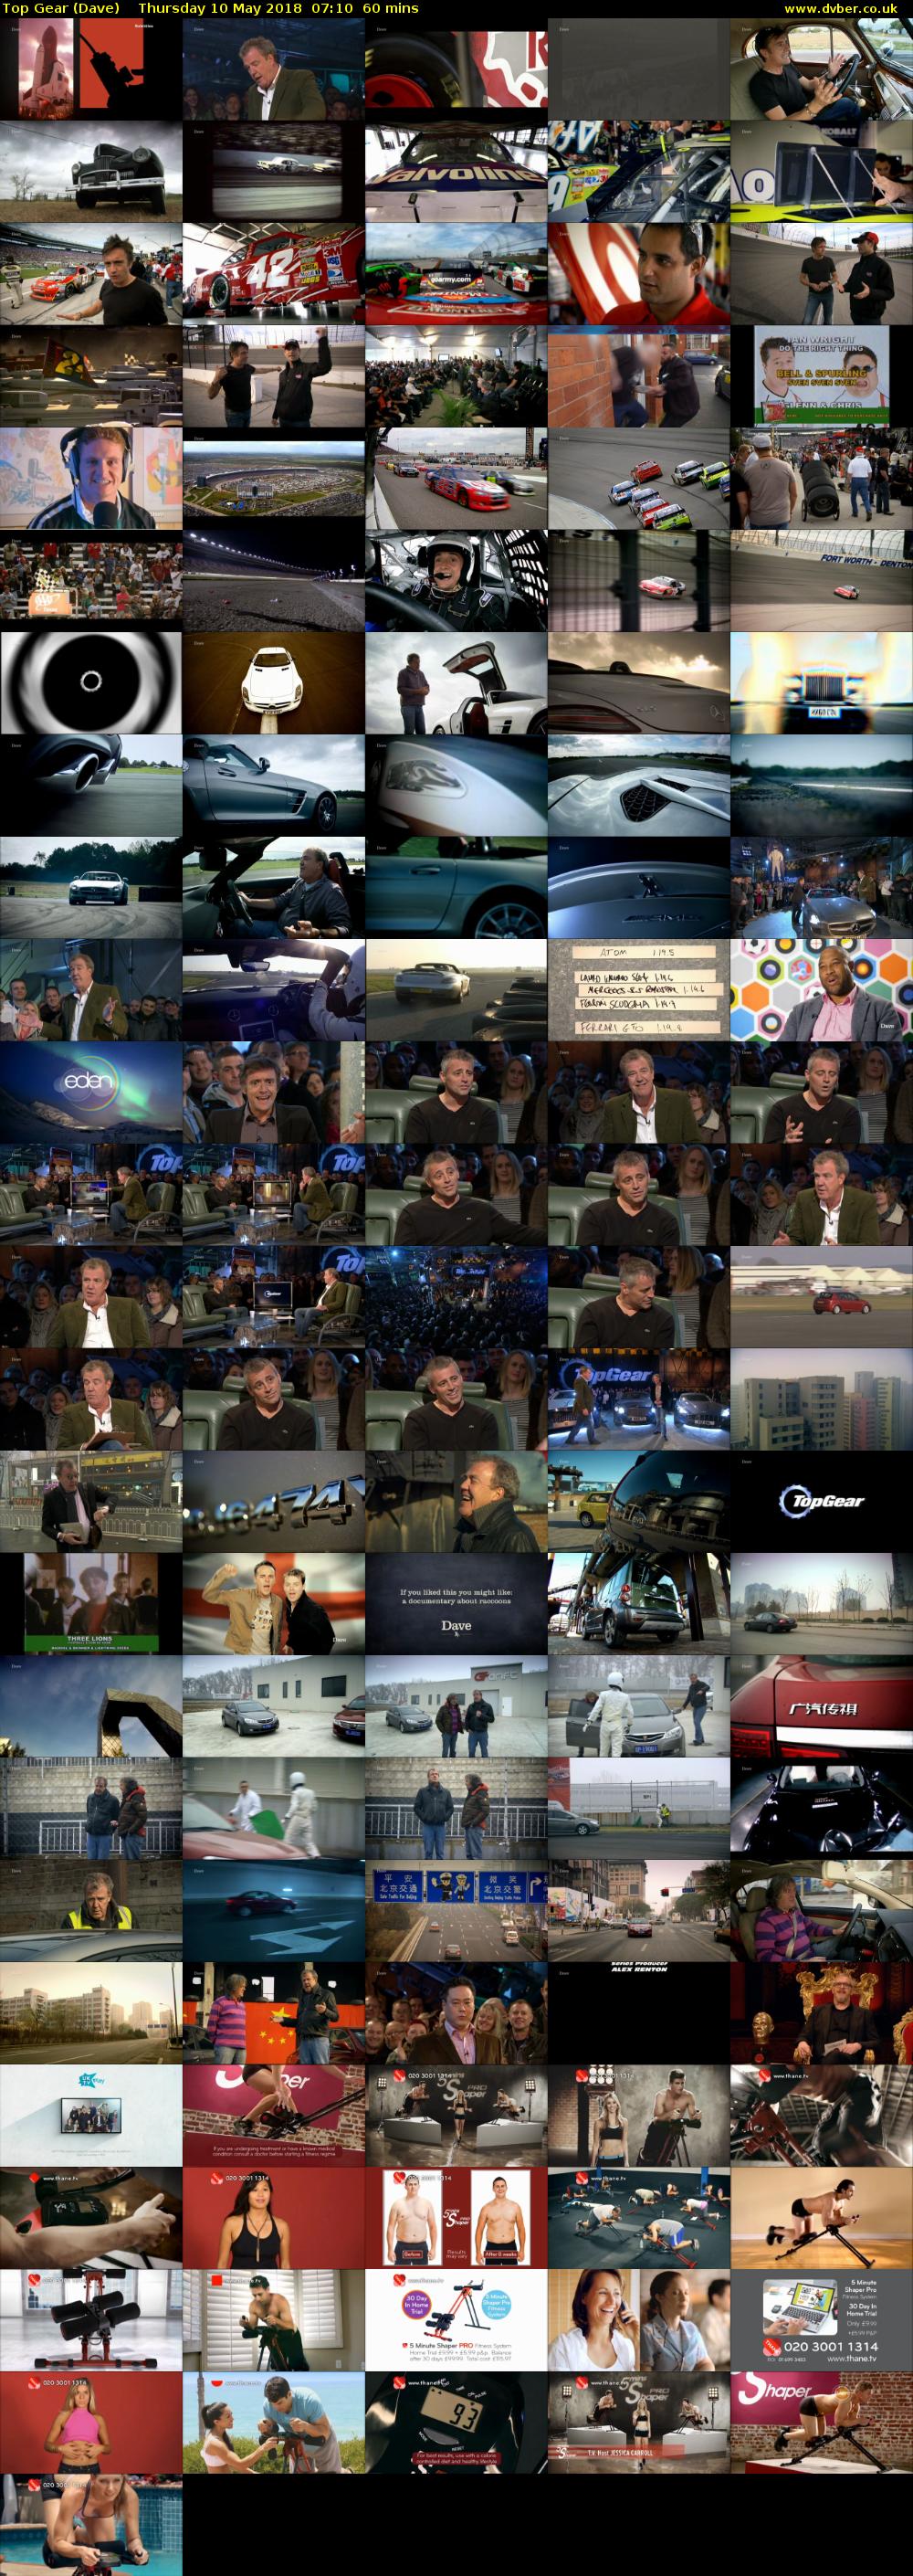 Top Gear (Dave) Thursday 10 May 2018 07:10 - 08:10